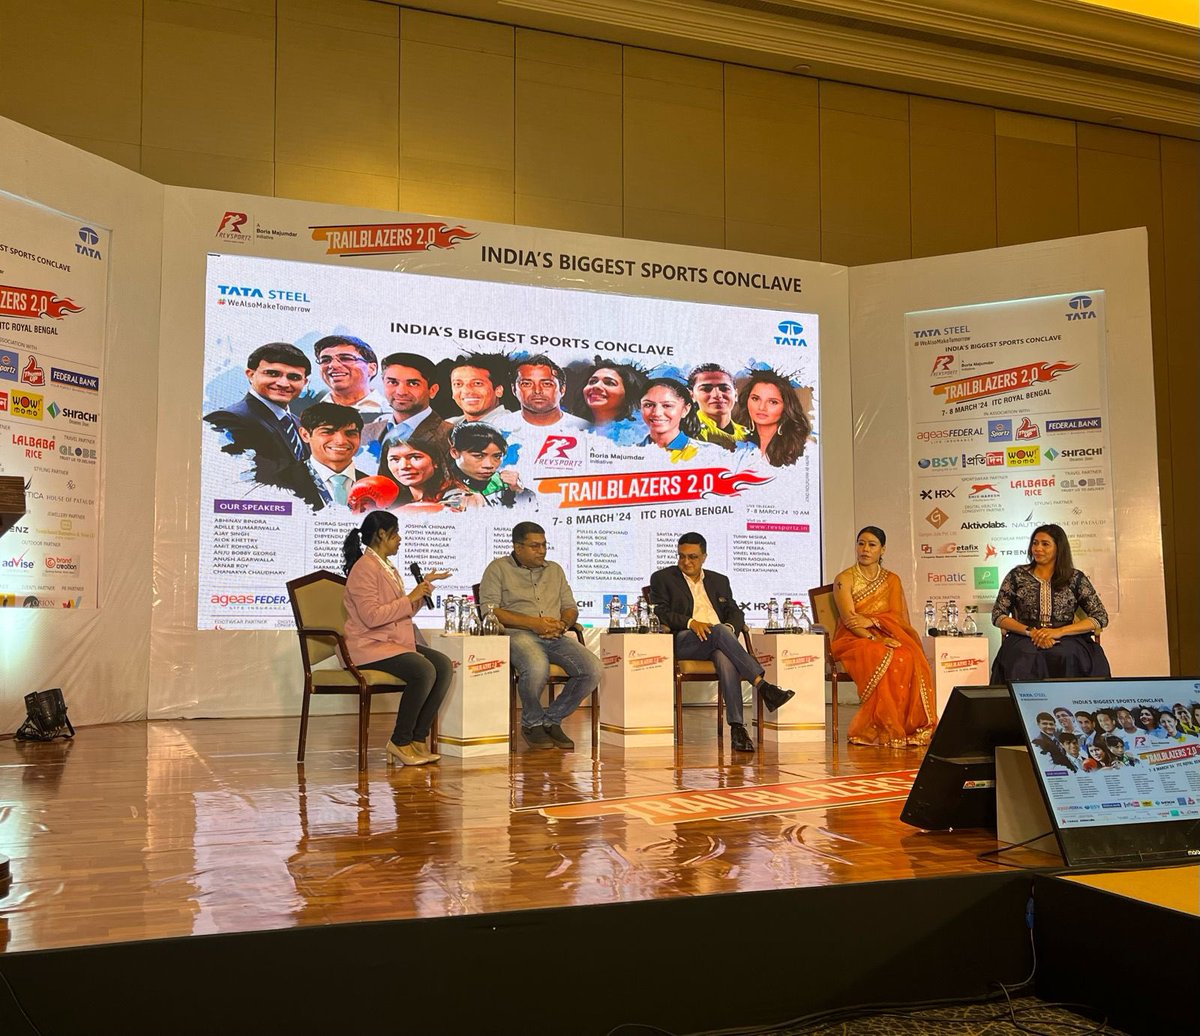 Sanjiv Navangul, MD & CEO, speaking at the Trailblazers 2.0 on a panel with medal winners Mary Kom and Anju Bobby George and Dr Rohit Gutgutia. Moderated by Sharmistha Gupto the talks centred on women sports and health. #bsvwithu #womentoring #WomenInSport